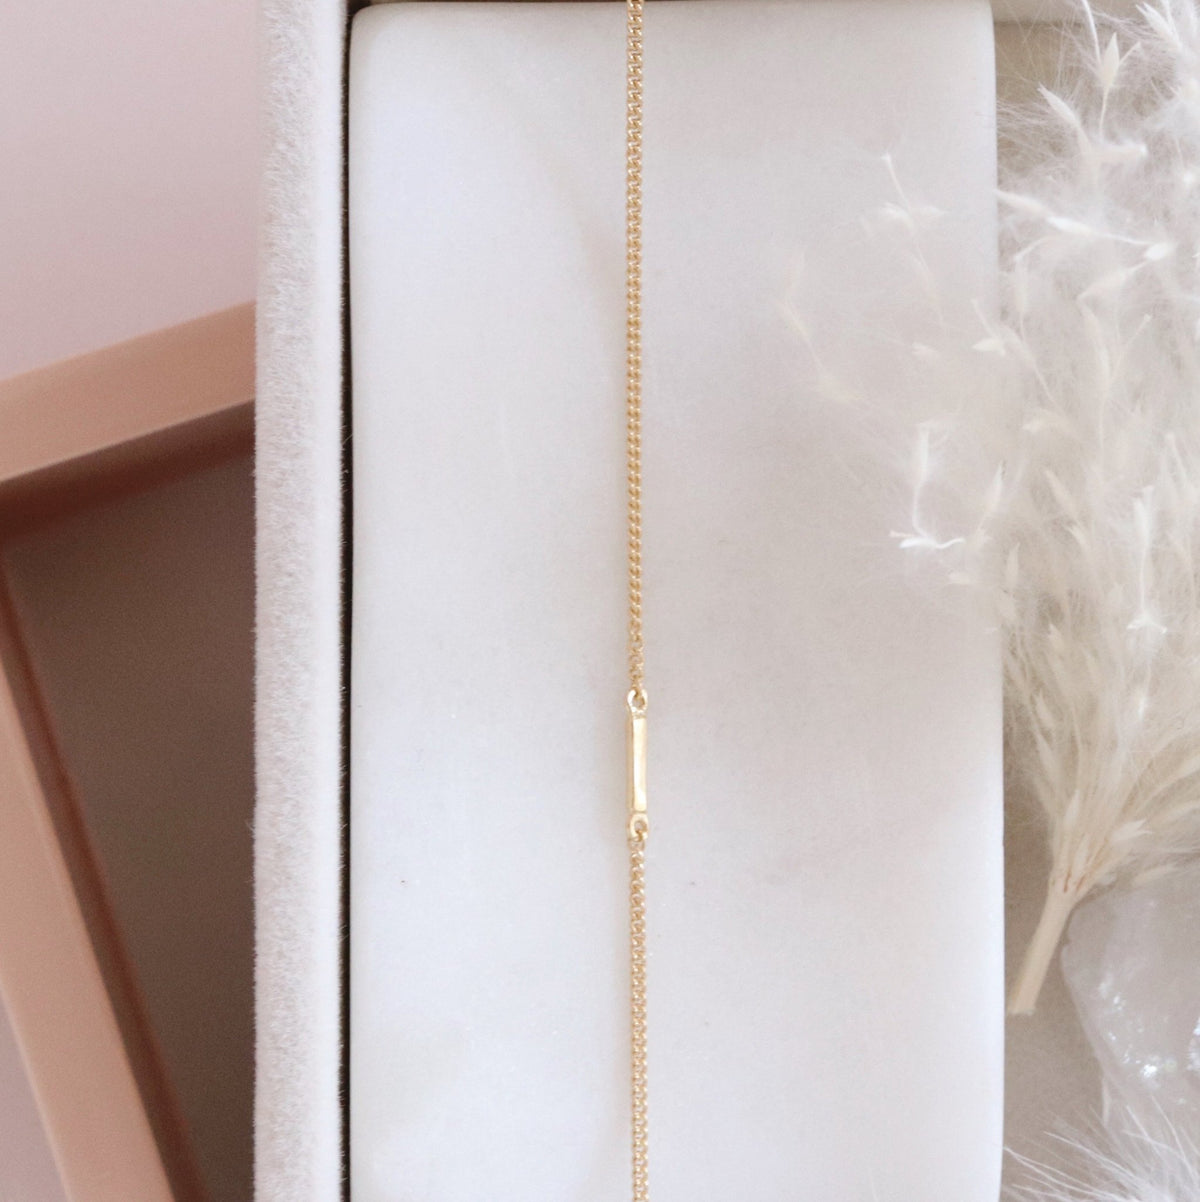 NOTABLE OFFSET INITIAL NECKLACE - I - GOLD - SO PRETTY CARA COTTER